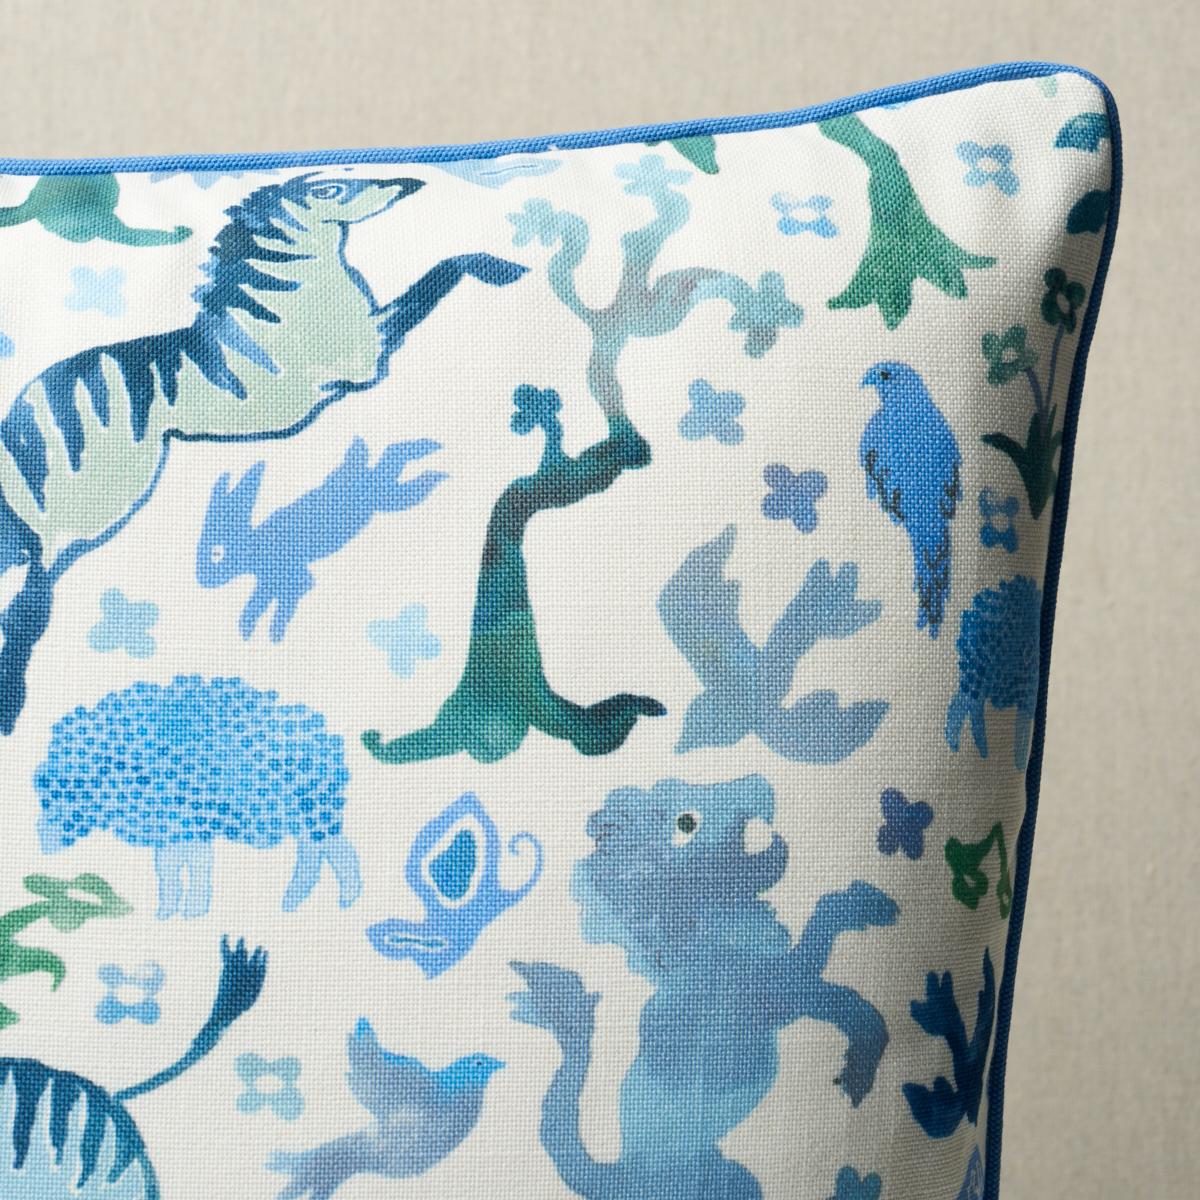 This pillow features Beasts Indoor/Outdoor by Happy Menocal. Happy Menocal's Beasts Indoor/Outdoor is animated by a carnival of exotic creatures and fanciful flora. This imaginative performance fabric has wonderful tonal variations and a charming